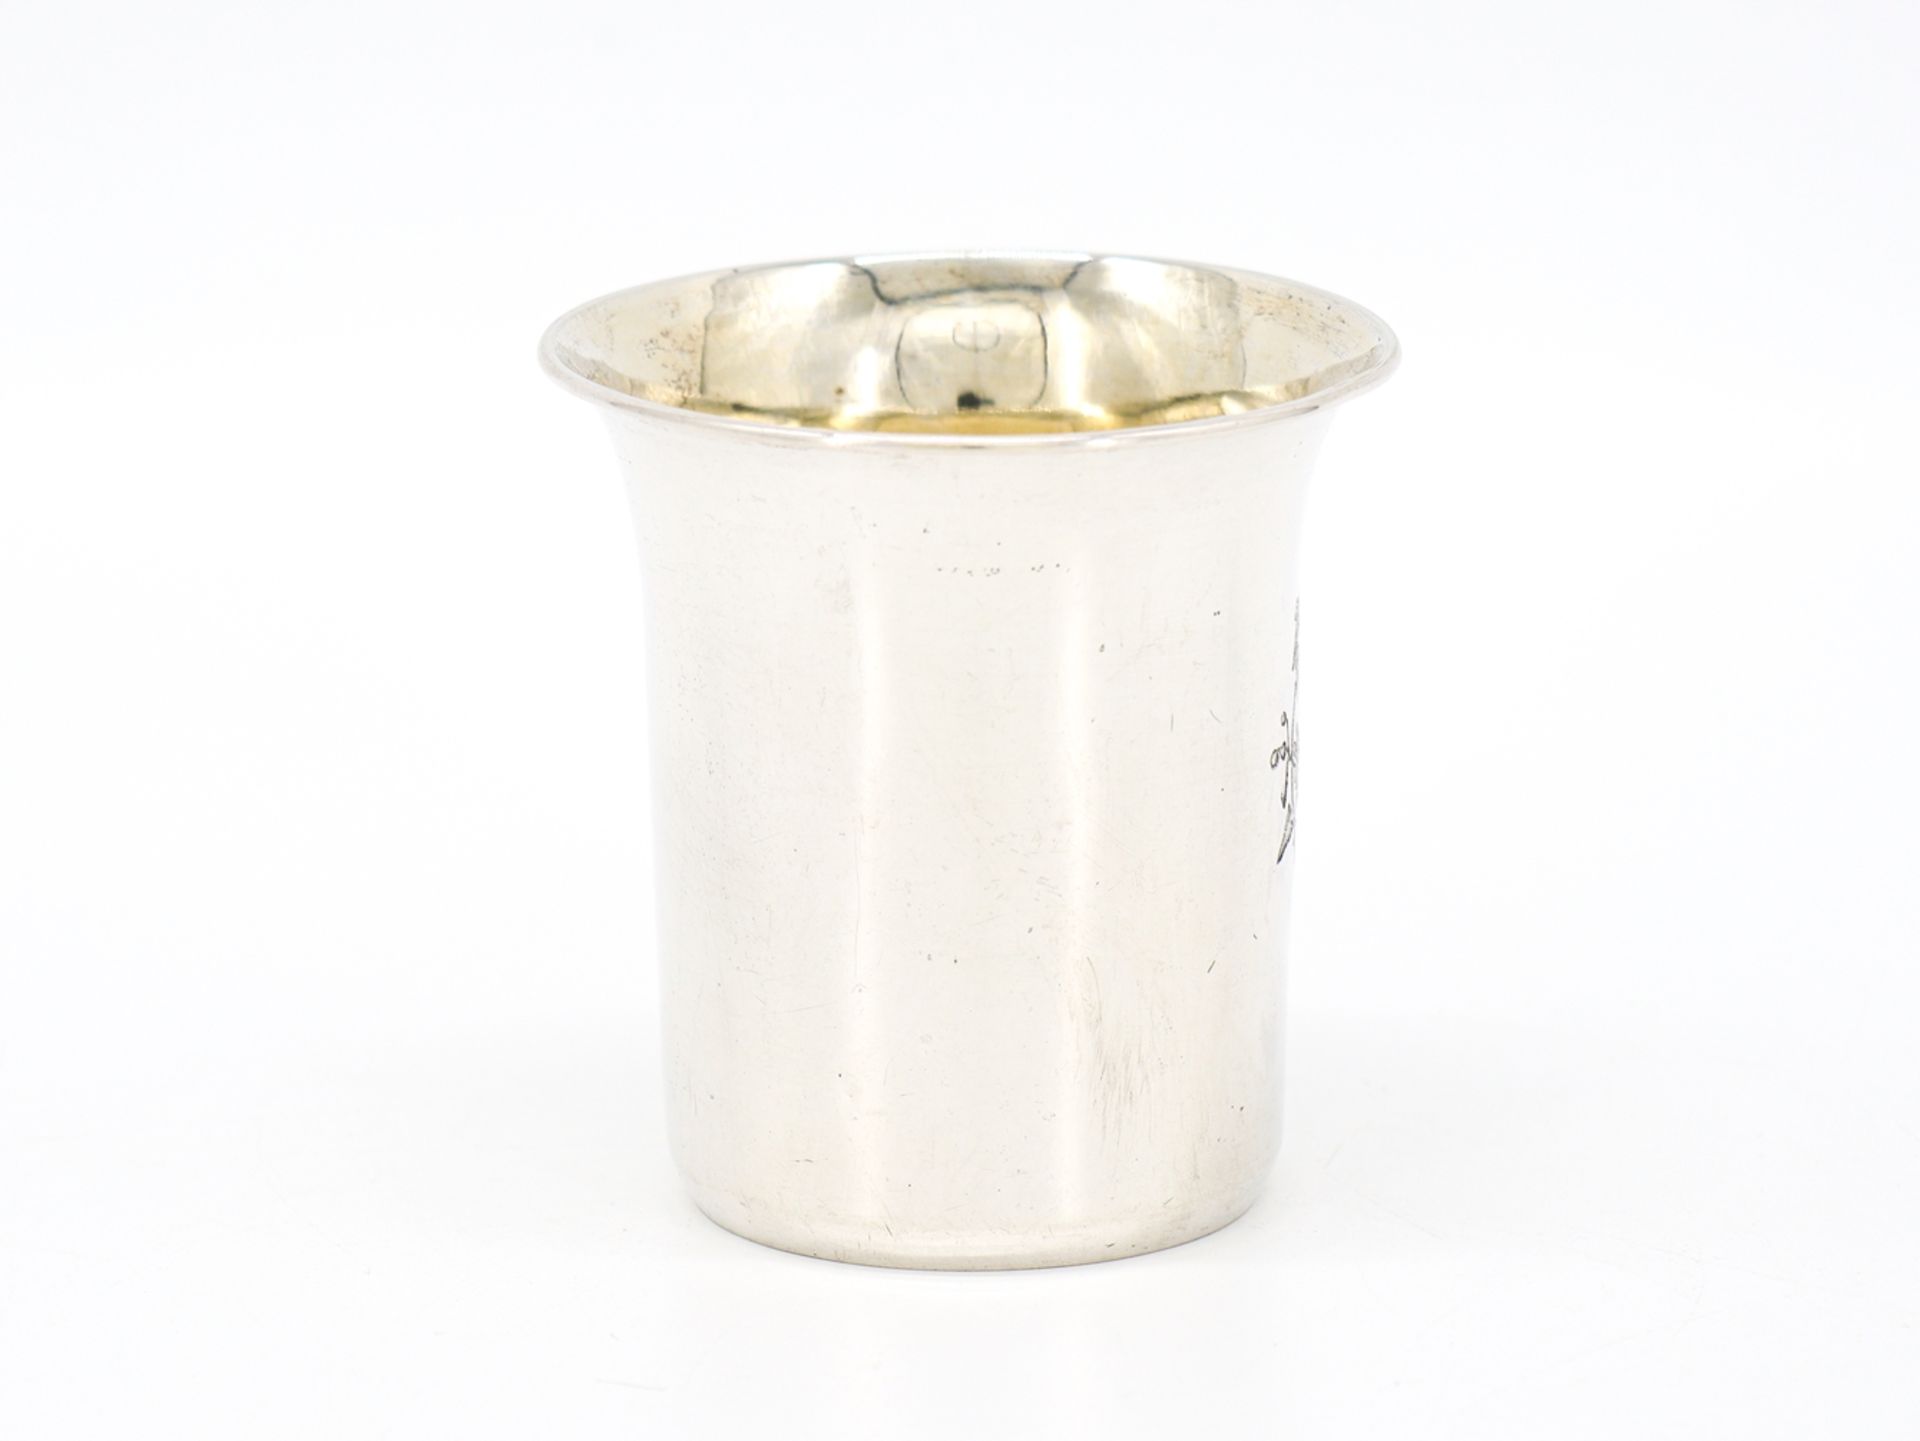 Baptismal cup silver gilded inside, mid 19th century. - Image 3 of 6